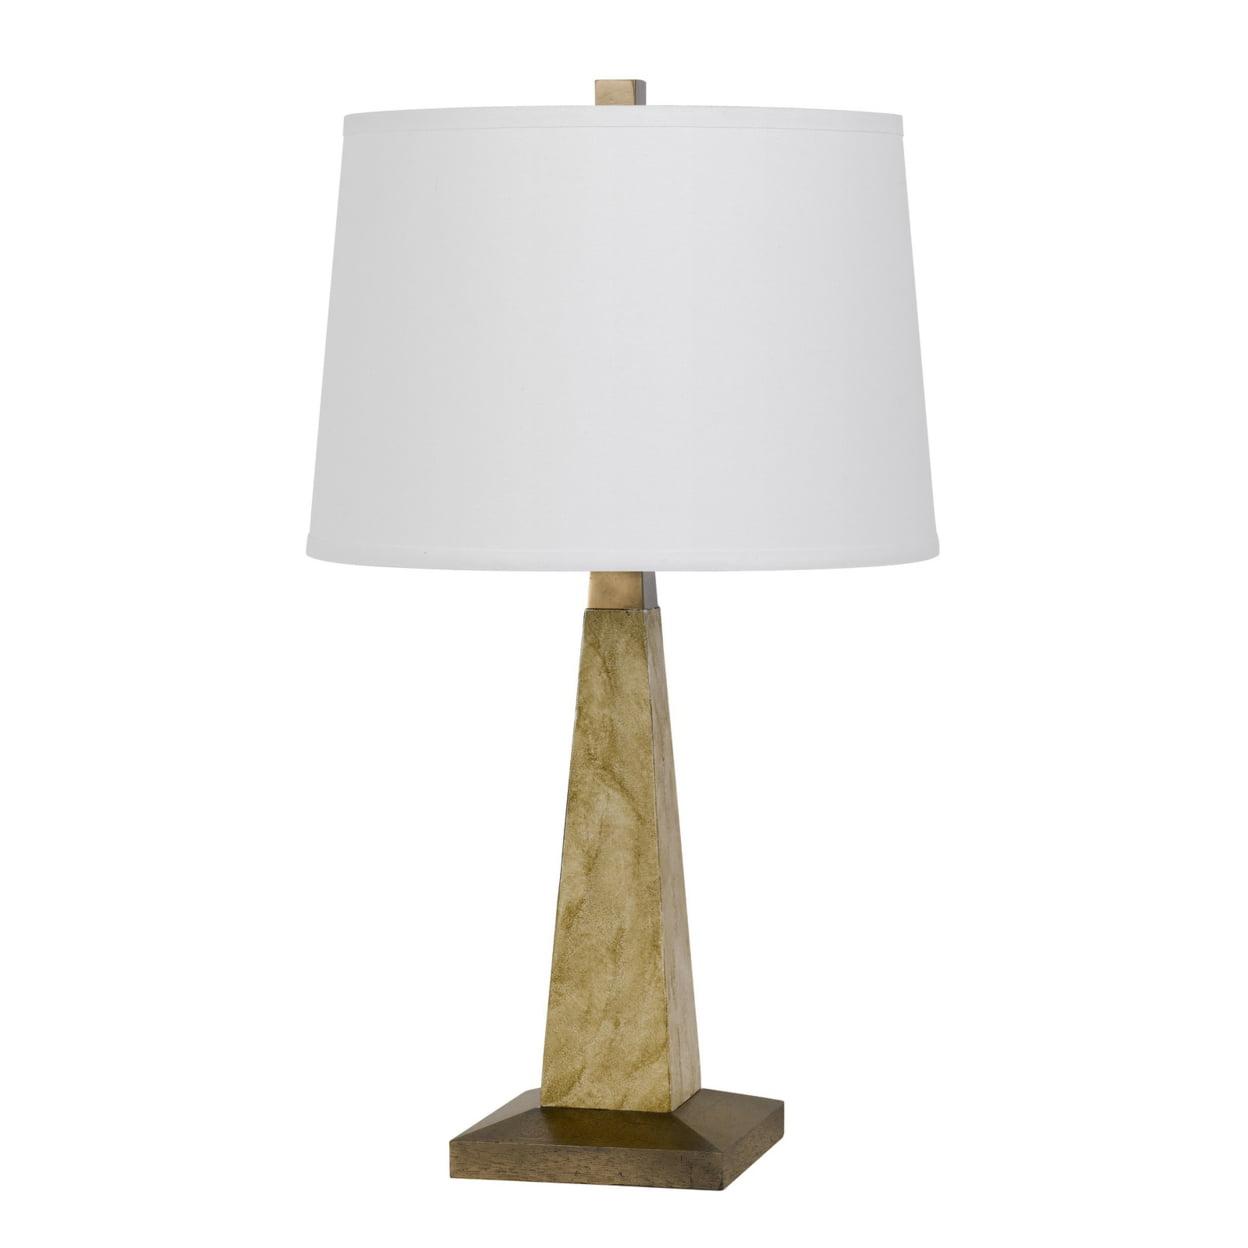 Elegant 28" White and Gold Pyramid Resin Table Lamp with 3-Way Switch